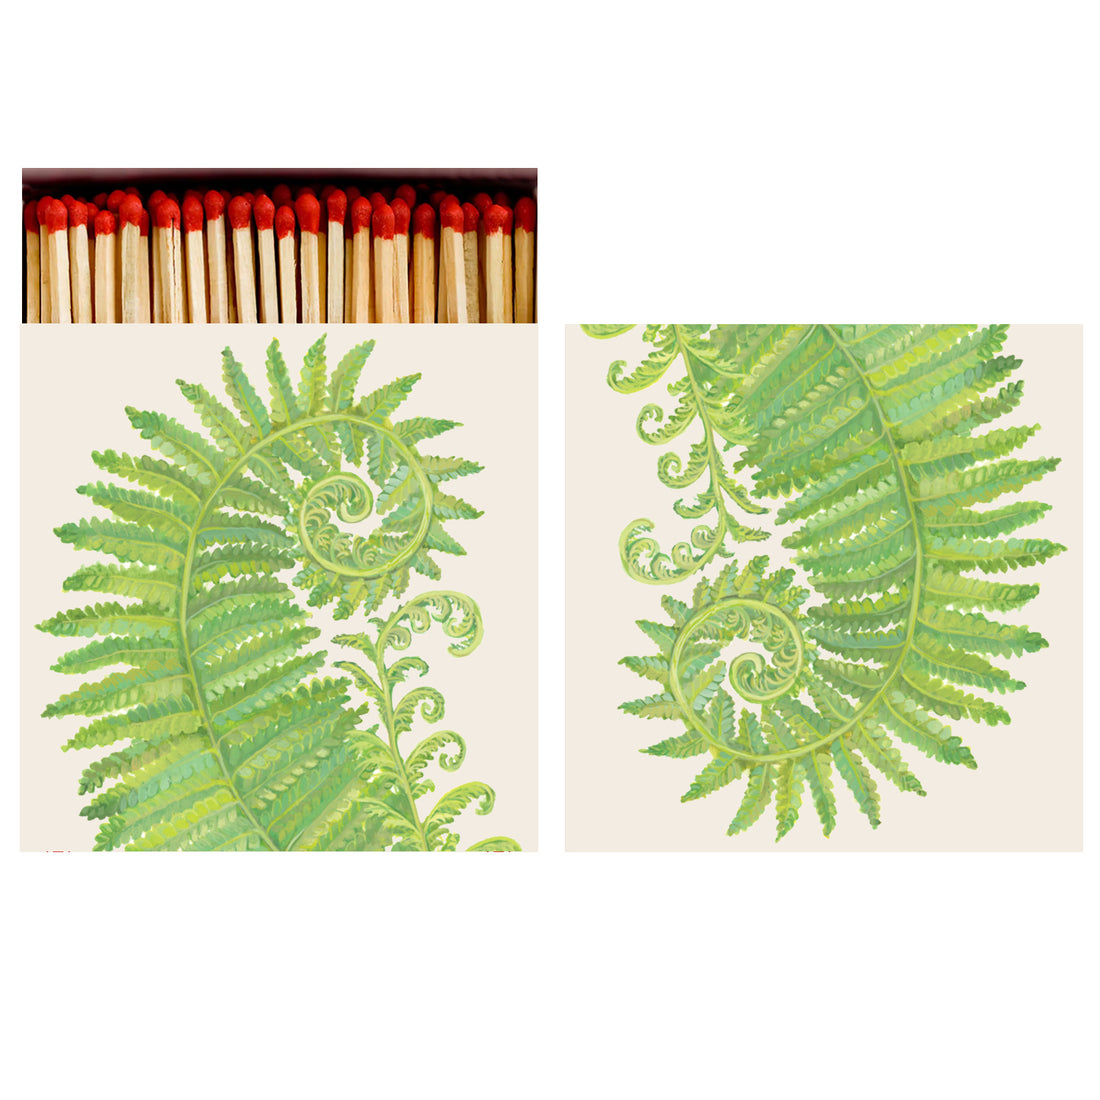 Two identical sides of a square match box, the left of which is open slightly to reveal the matches inside. The artwork on the box depicts a vibrant bright green fern frond that spirals delicately over a cream background.